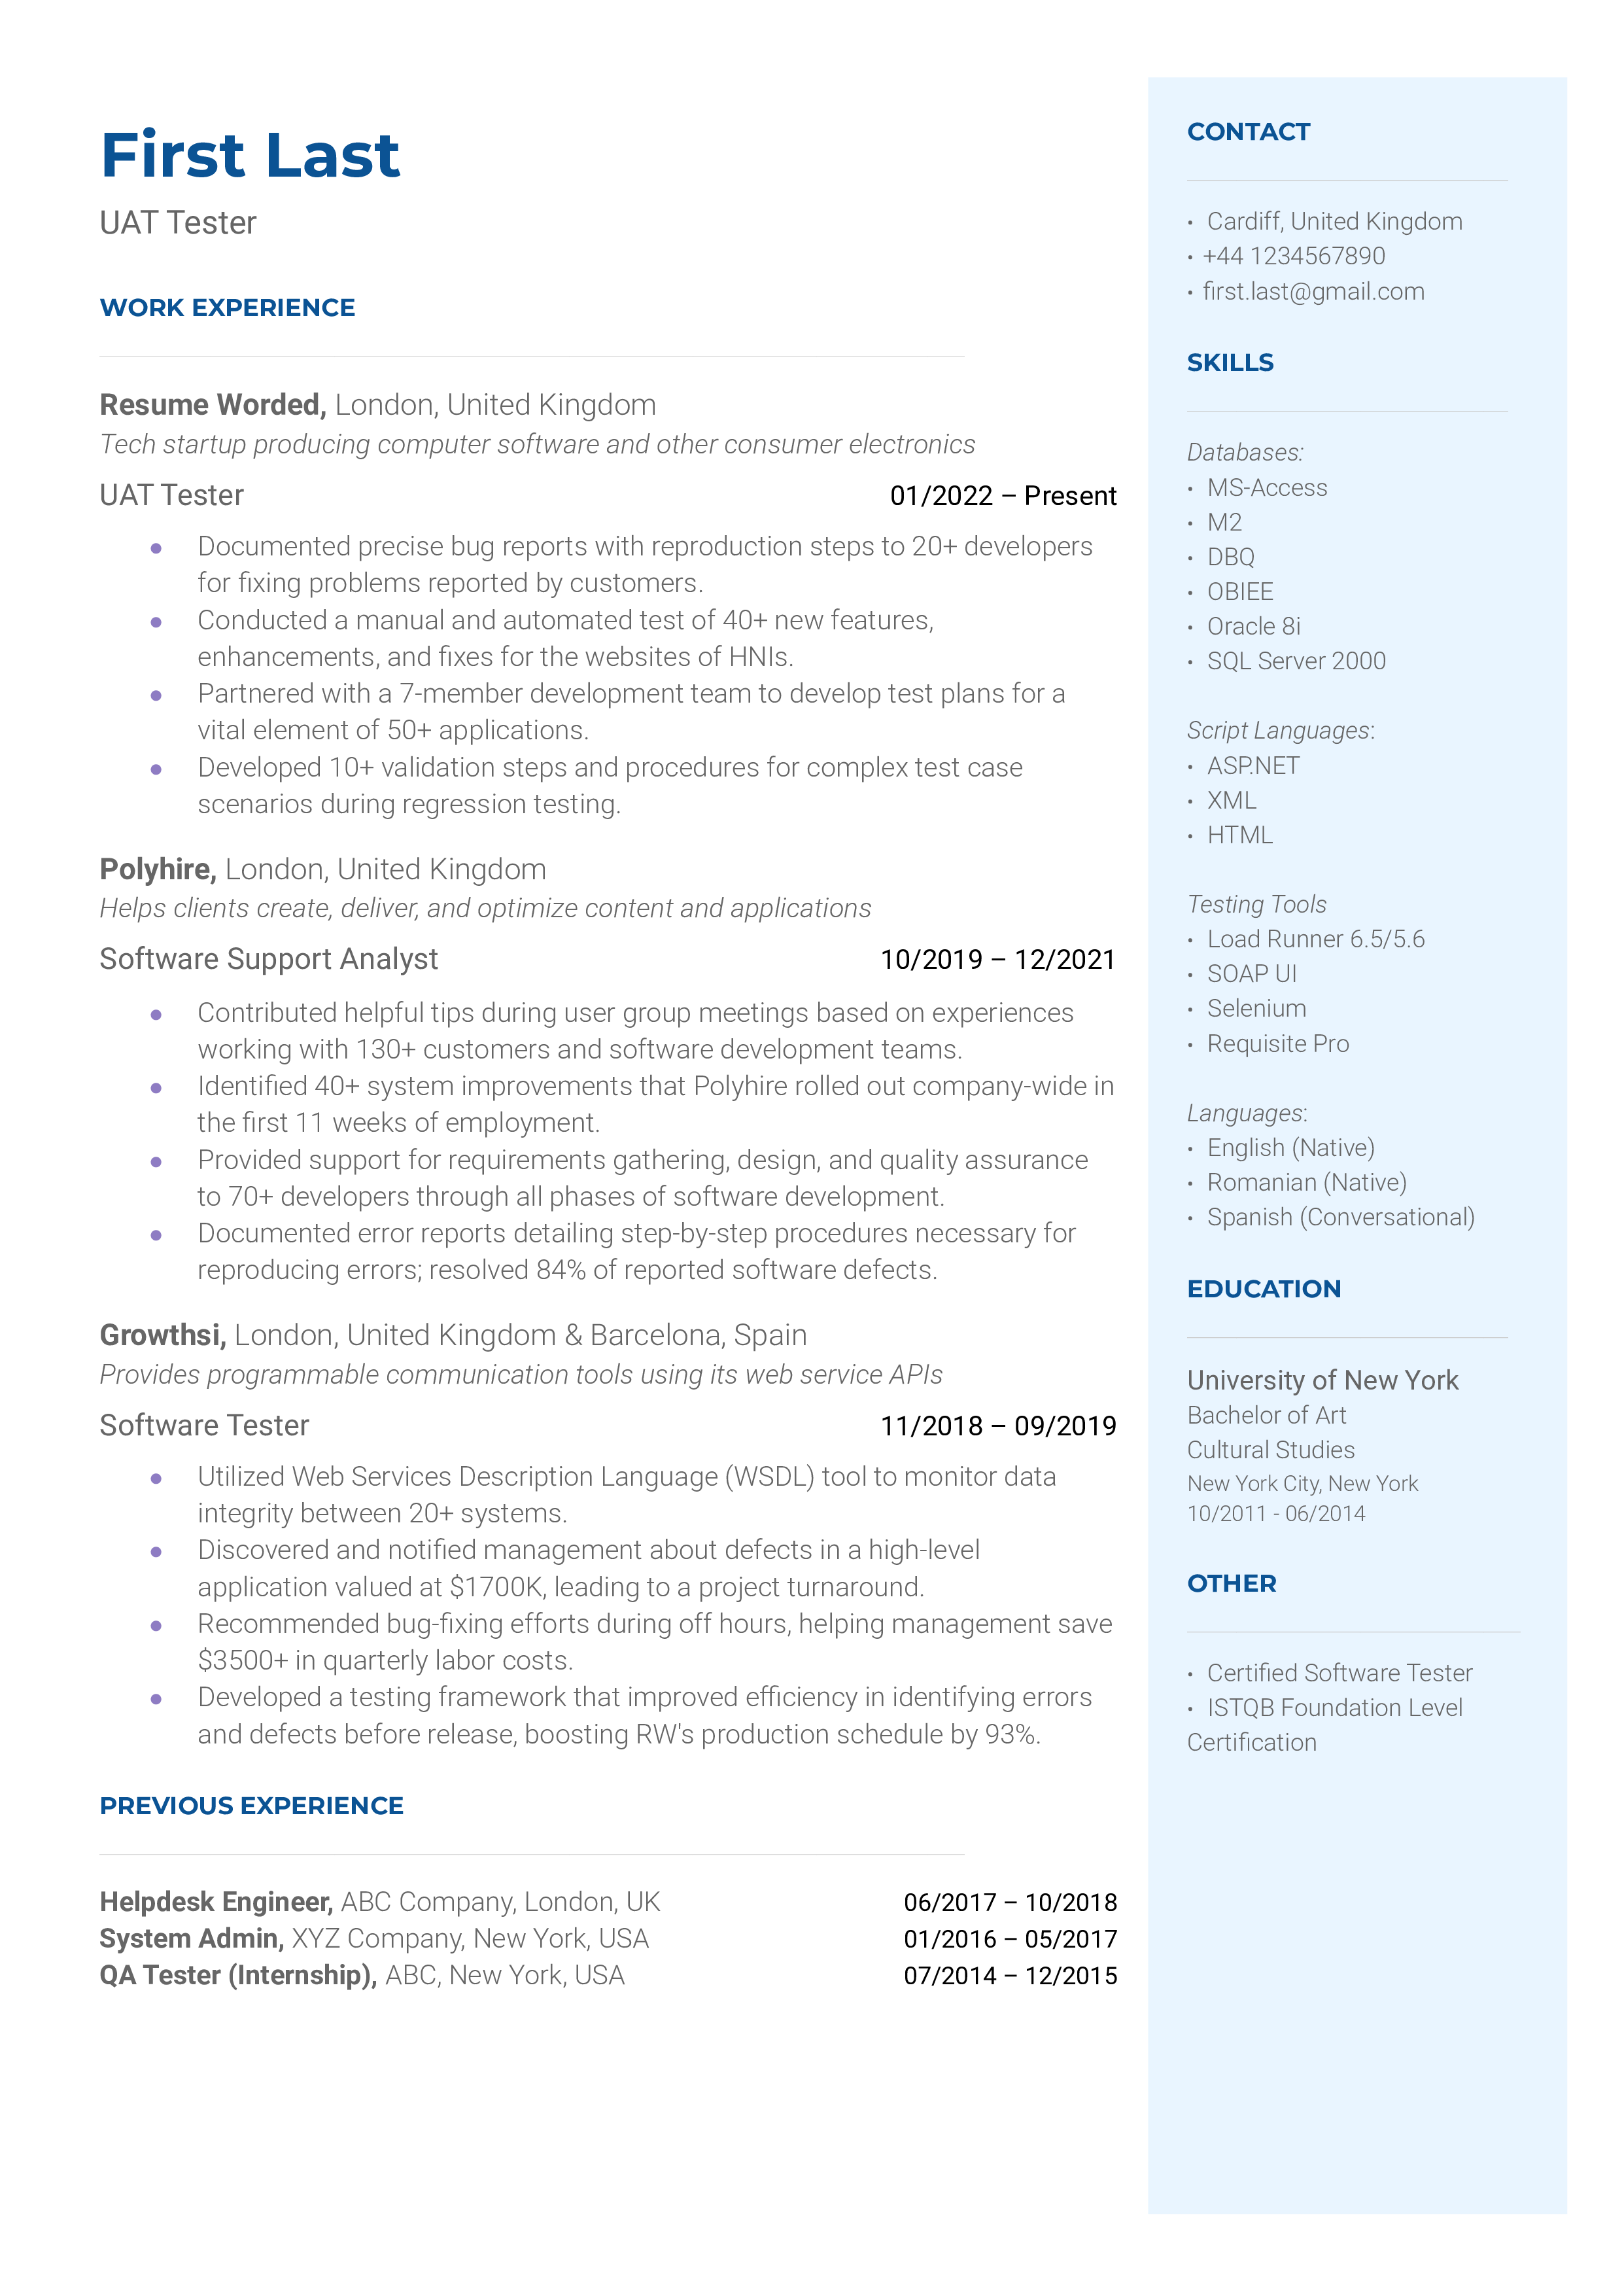 An UAT tester resume template including software testing certifications.